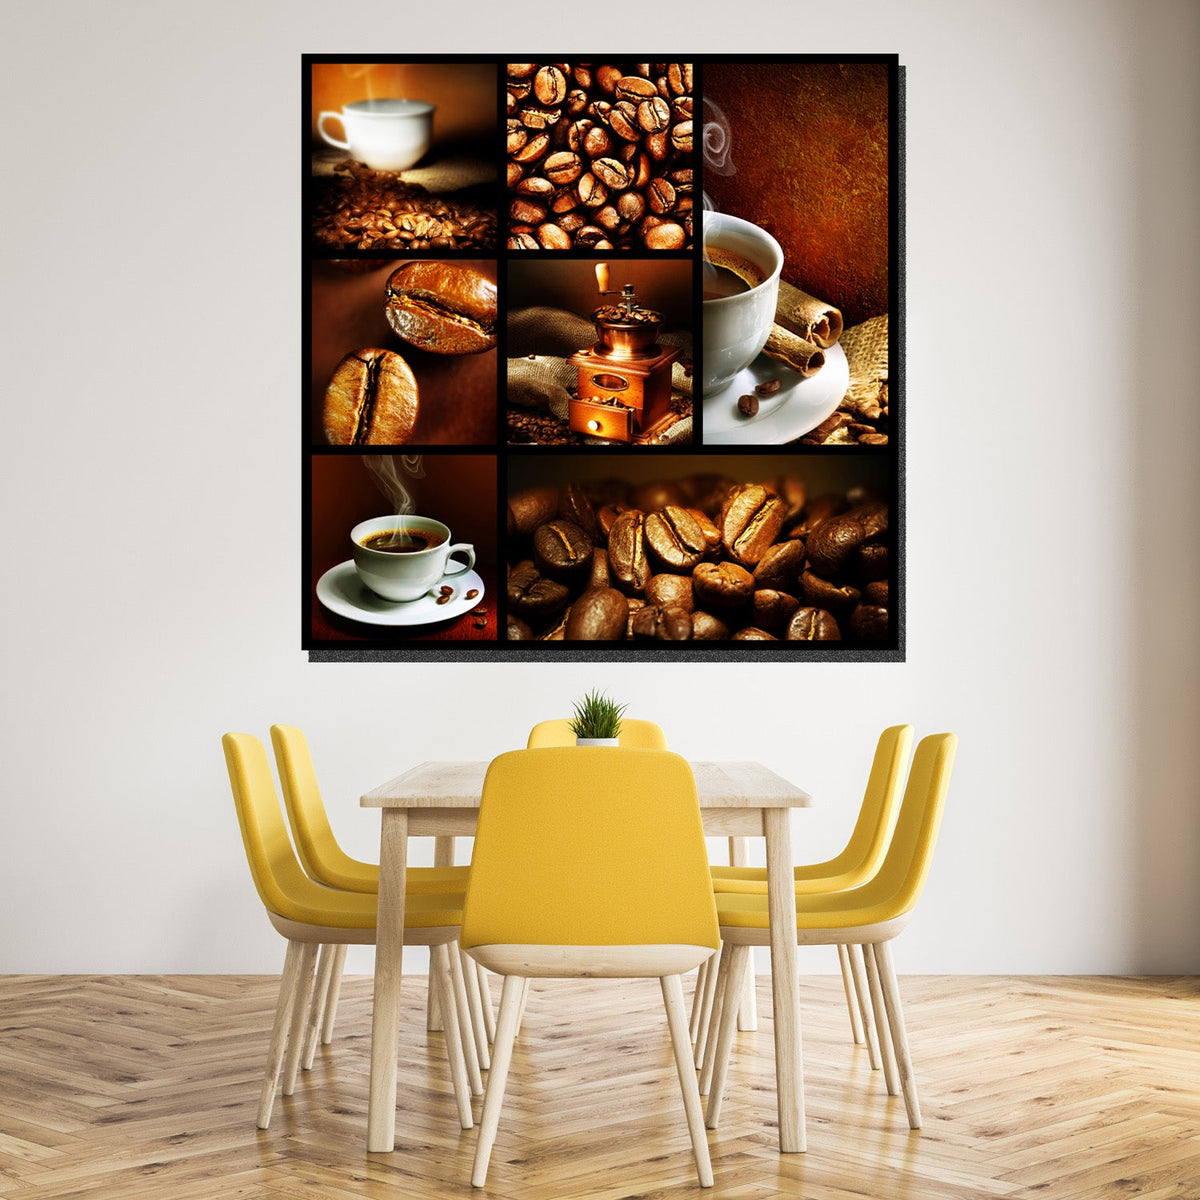 https://cdn.shopify.com/s/files/1/0387/9986/8044/products/CoffeeCollageCanvasArtprintStretched-4.jpg